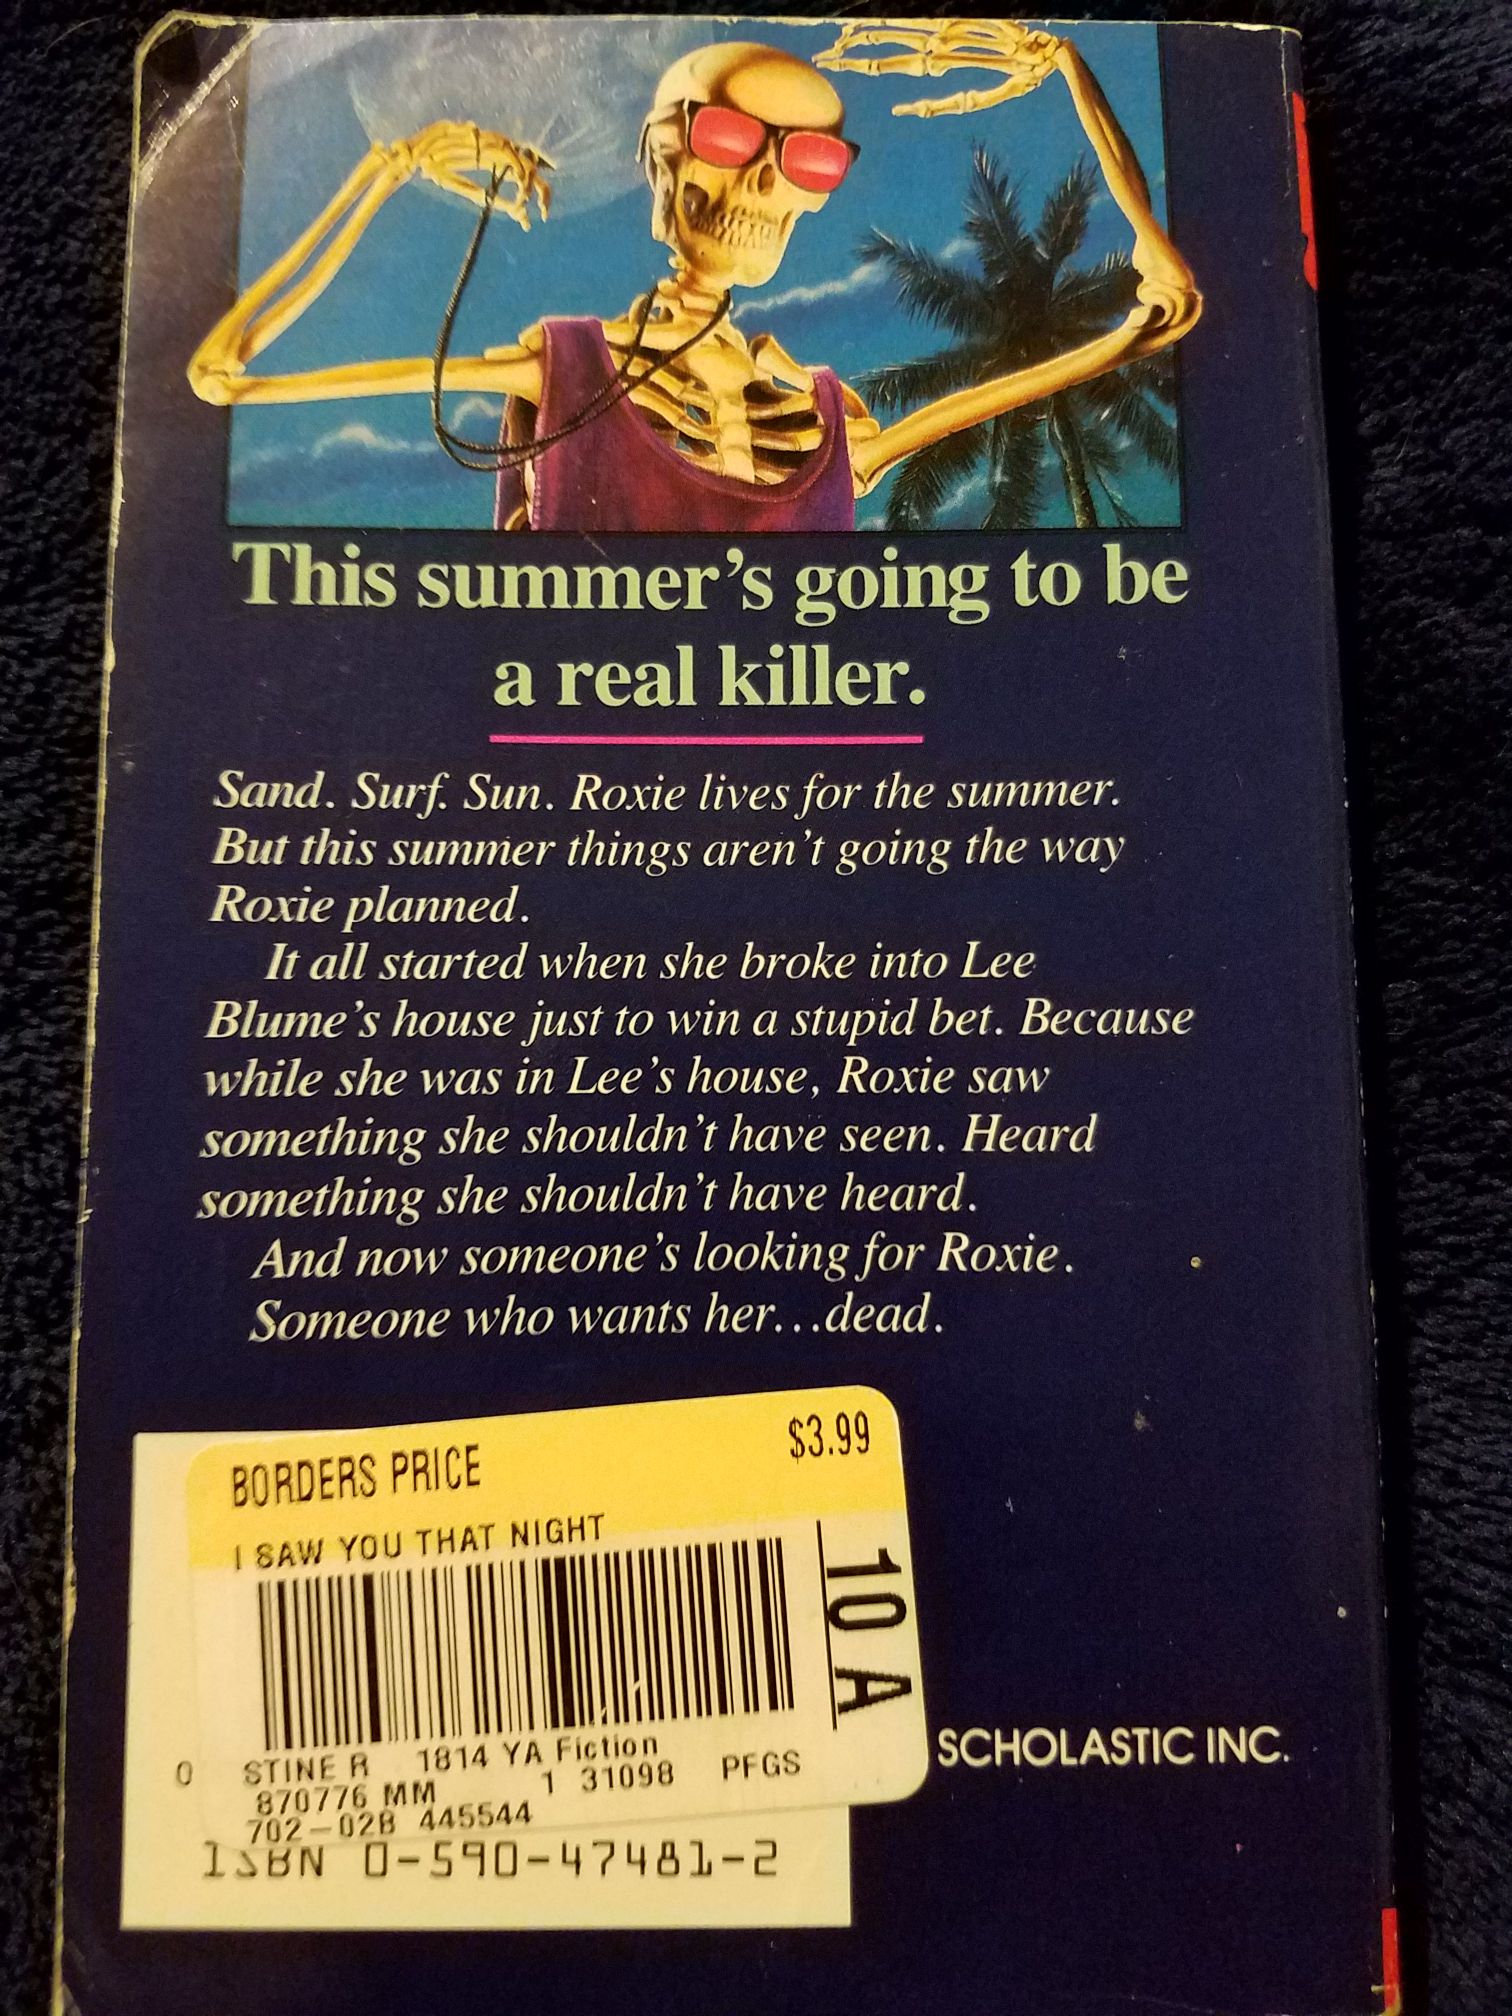 I Saw You That Night - R.L. Stine (Scholastic - Paperback) book collectible [Barcode 9780590474818] - Main Image 2